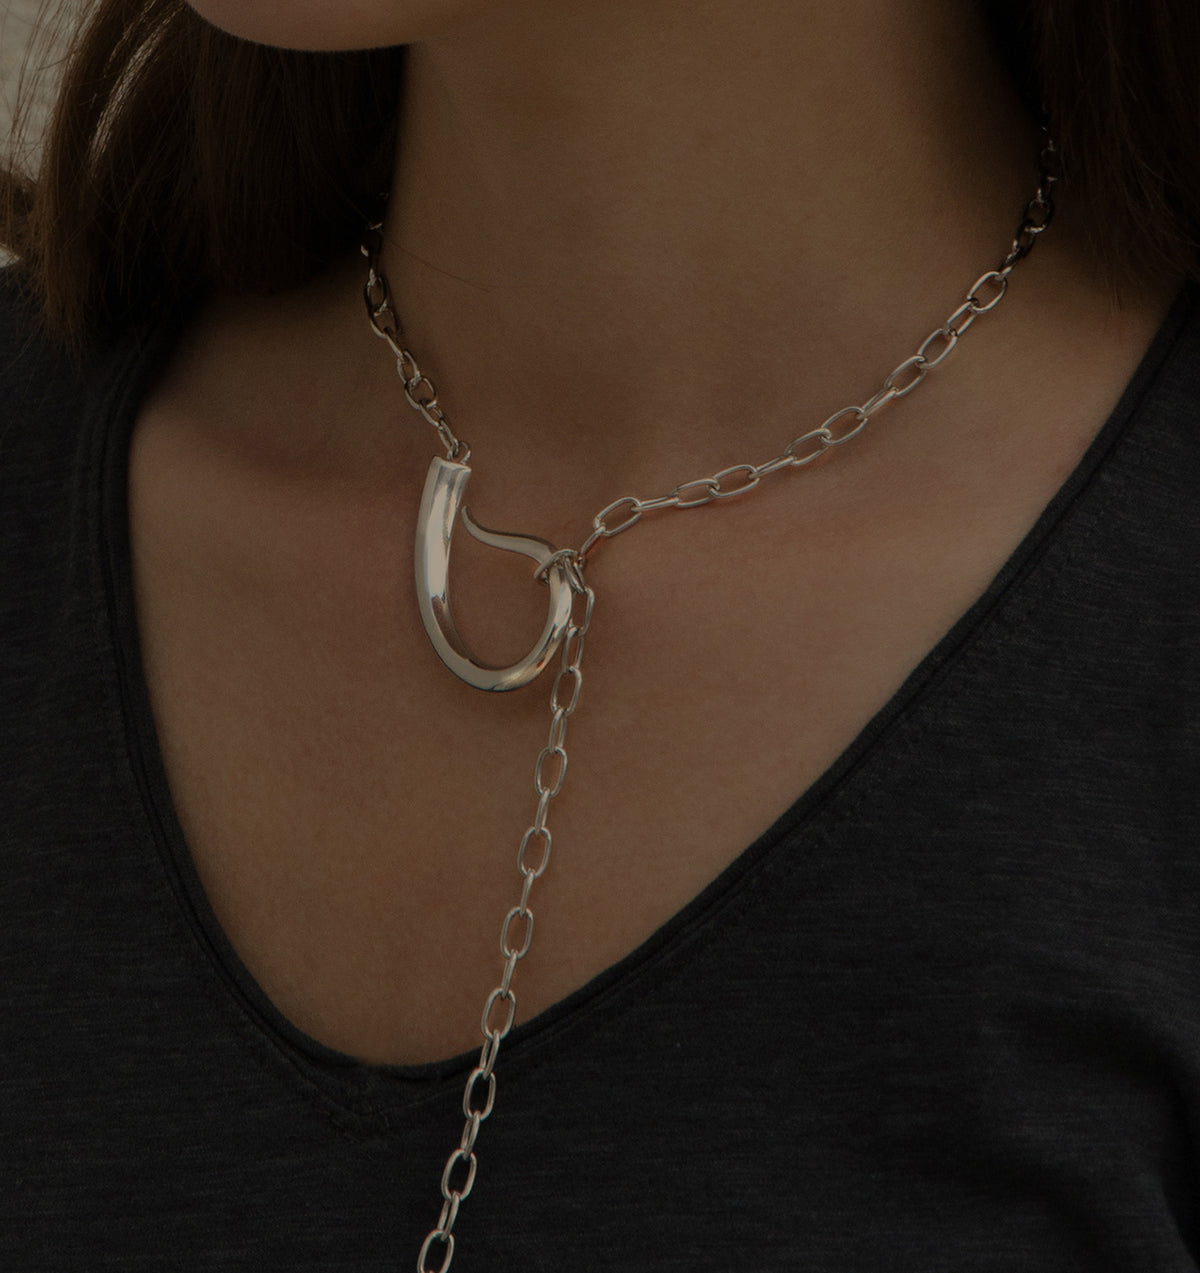 Chunky silver necklace